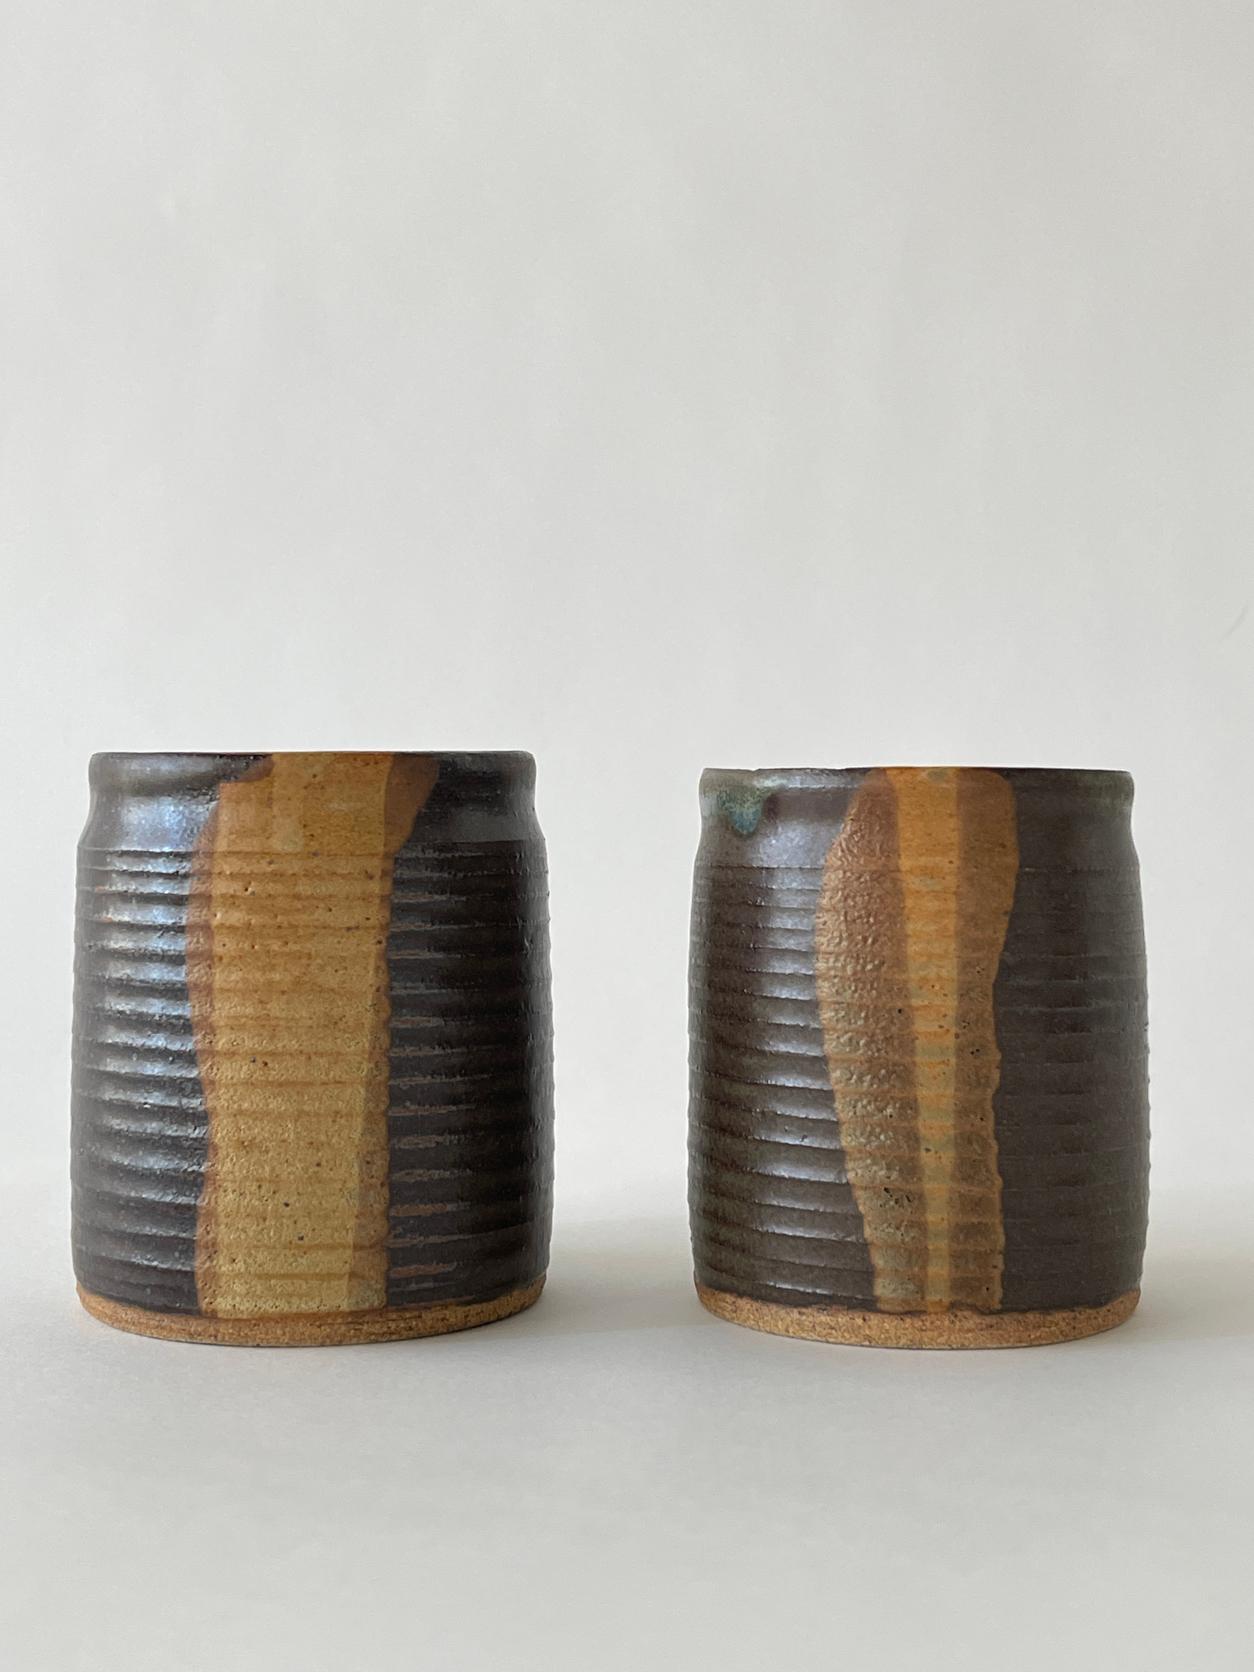 20th century Ridged ceramic cup set made in 1982. Beautiful ridged exterior with multi colored shades of brown throughout. 

Set of 2
Measures: 3.25